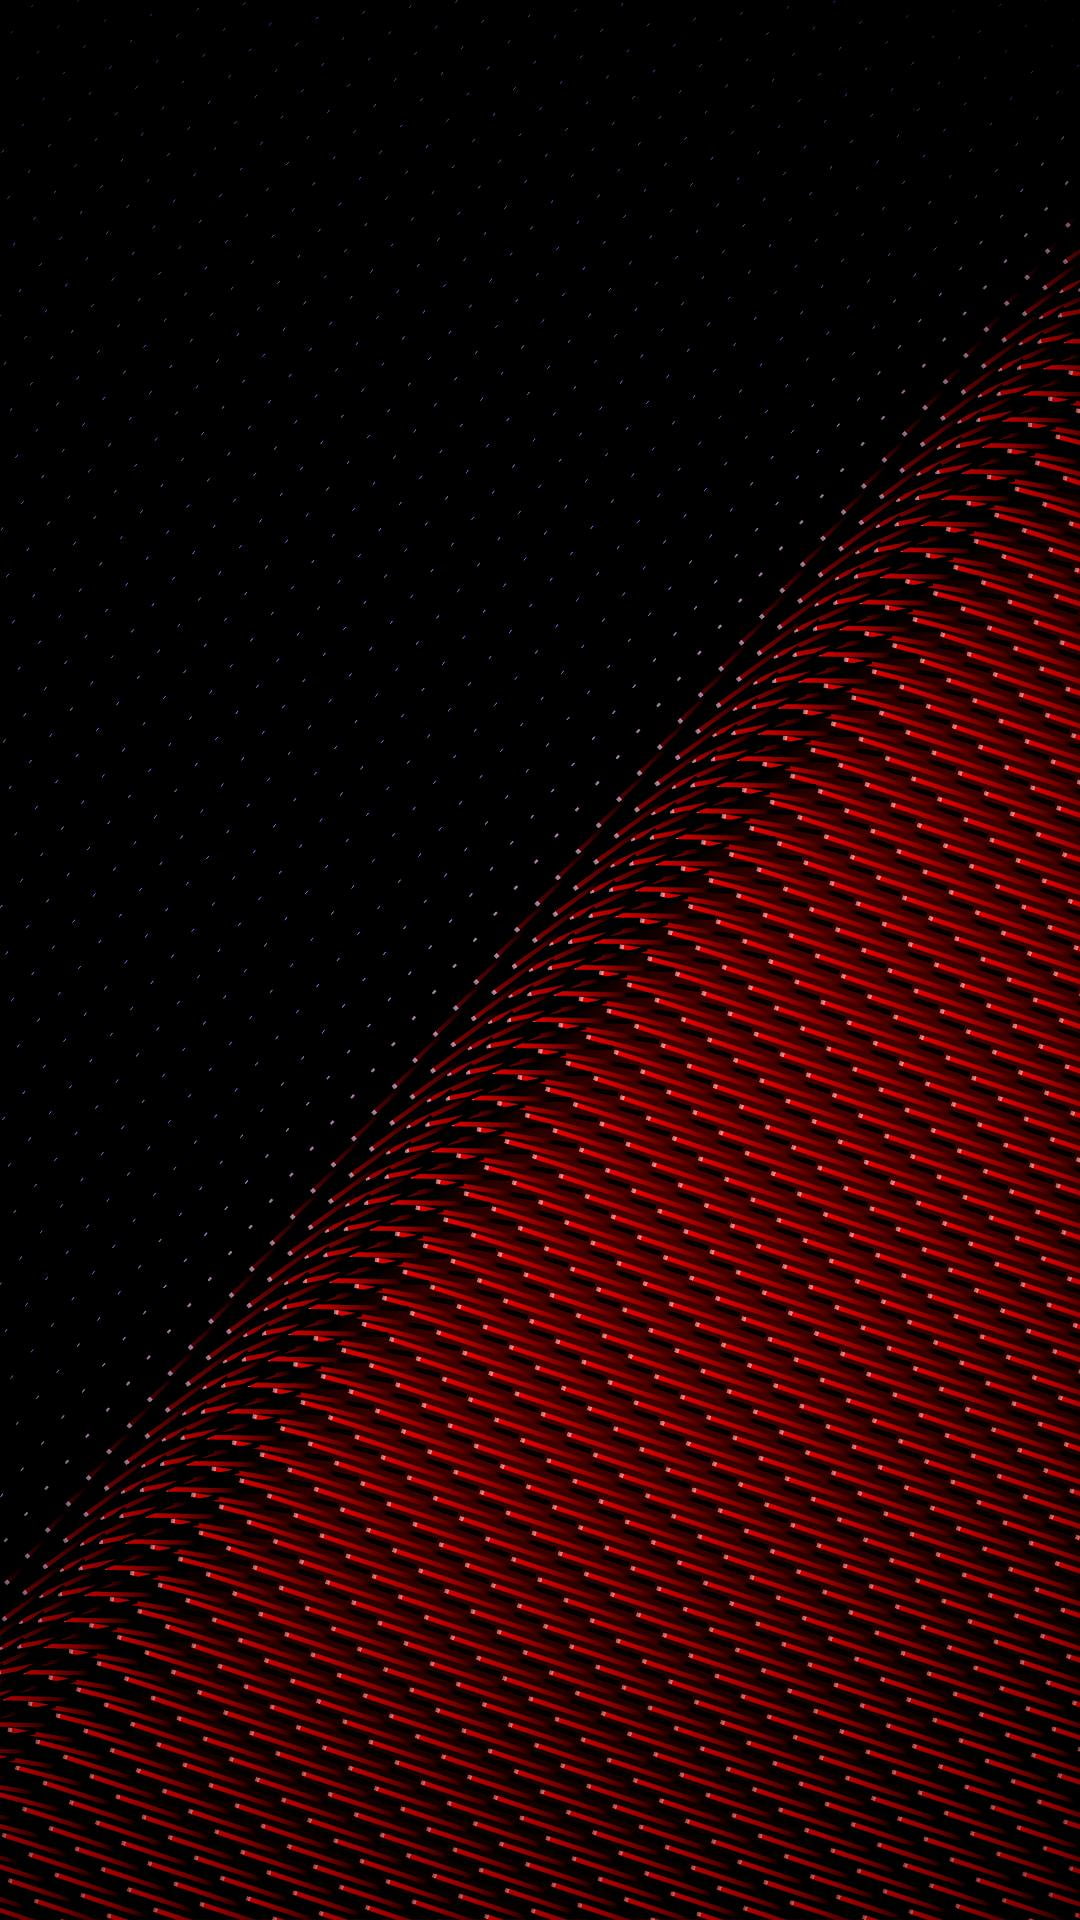 black background, abstract, amoled, portrait display